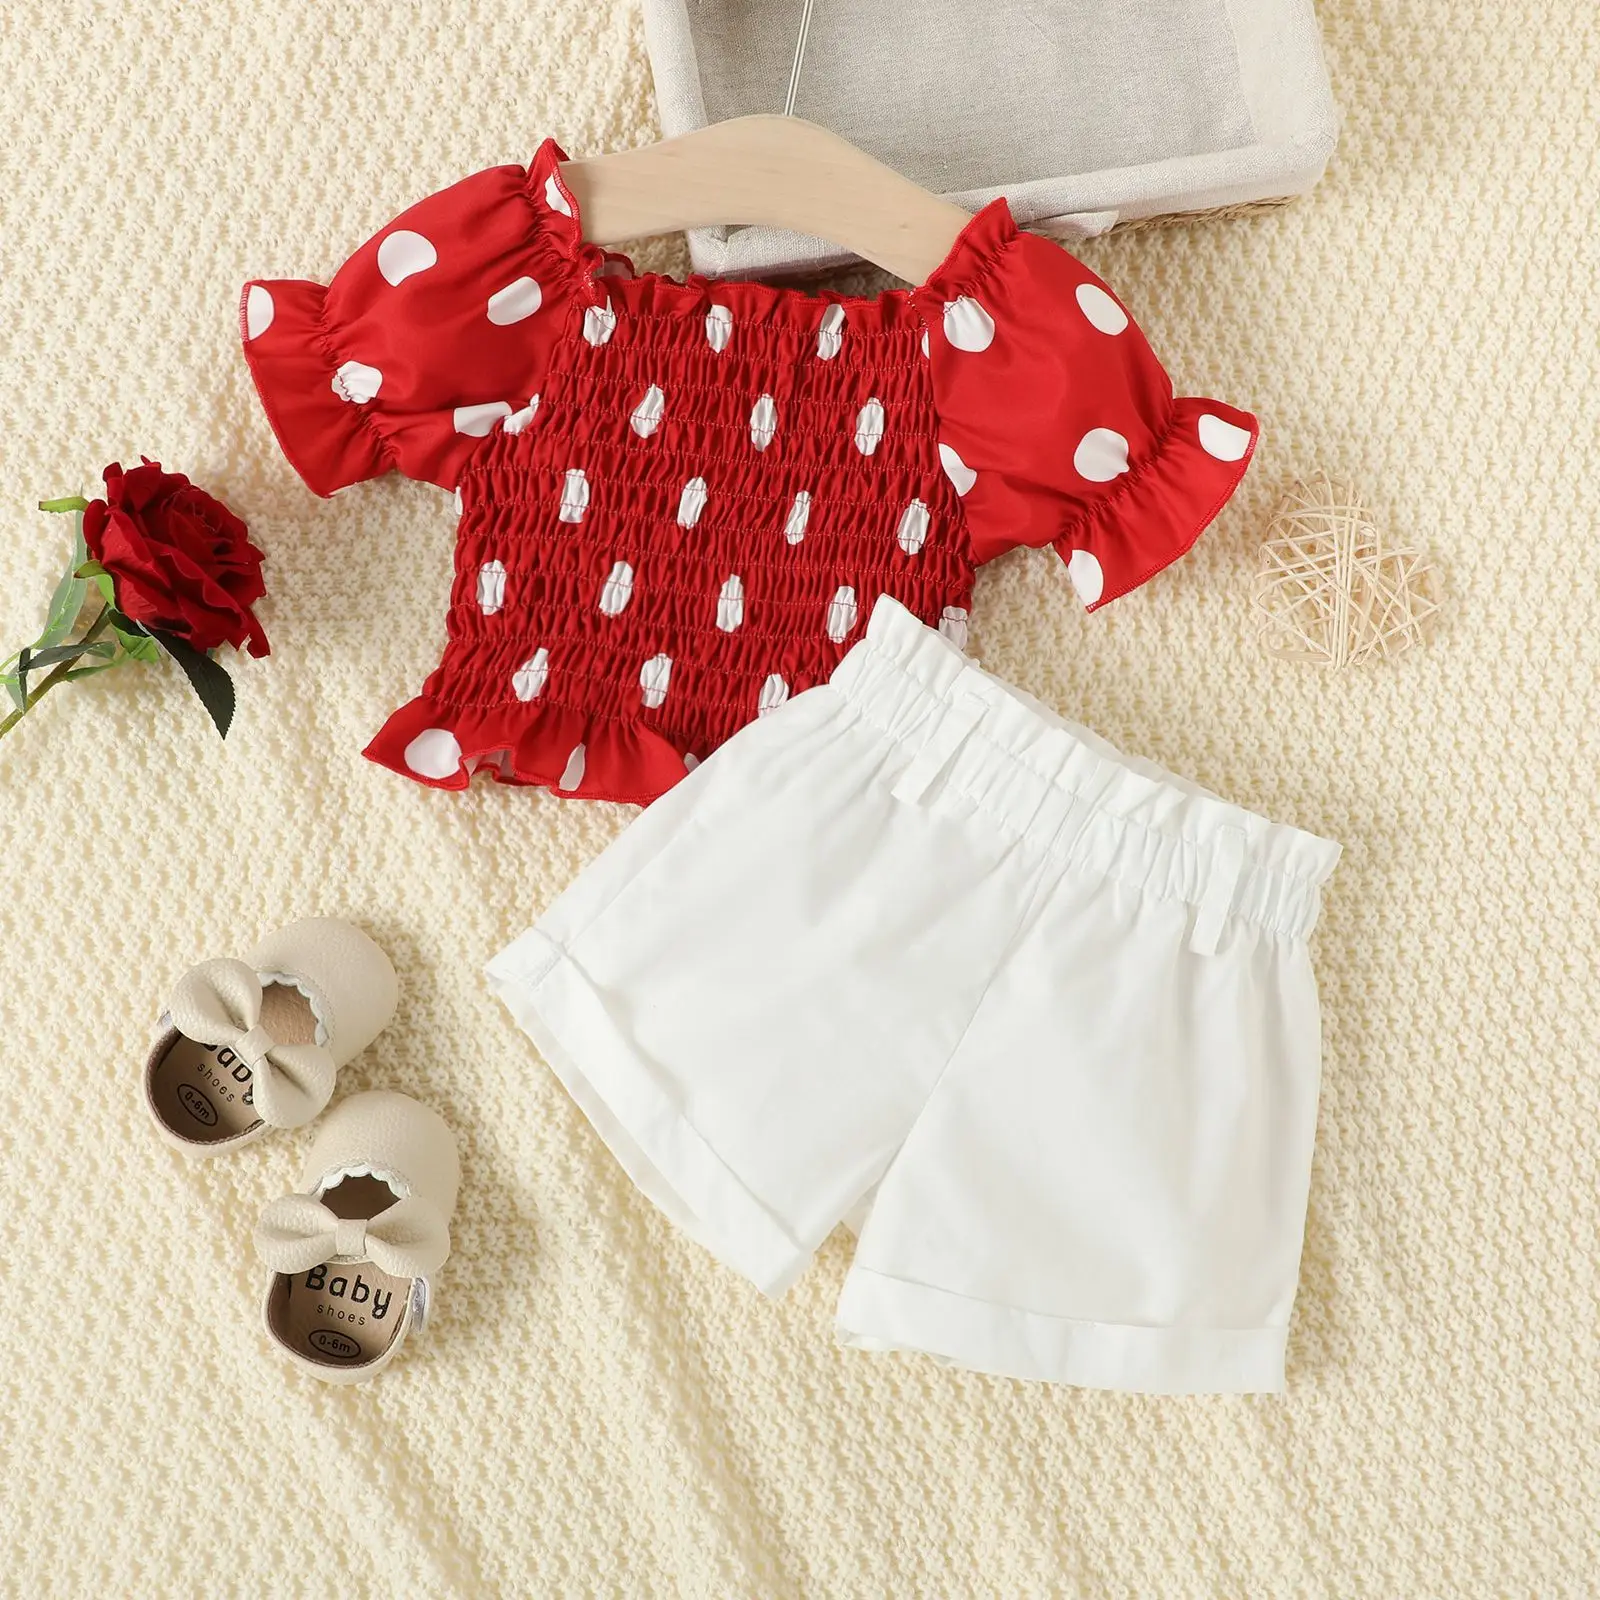 

2Pcs/Set Baby Girl Clothes Set 2023 Summer Children Girl Suit Polka Dot Puff Sleeve Top+Shorts Costume For Kids1 2 3 4 Years Old